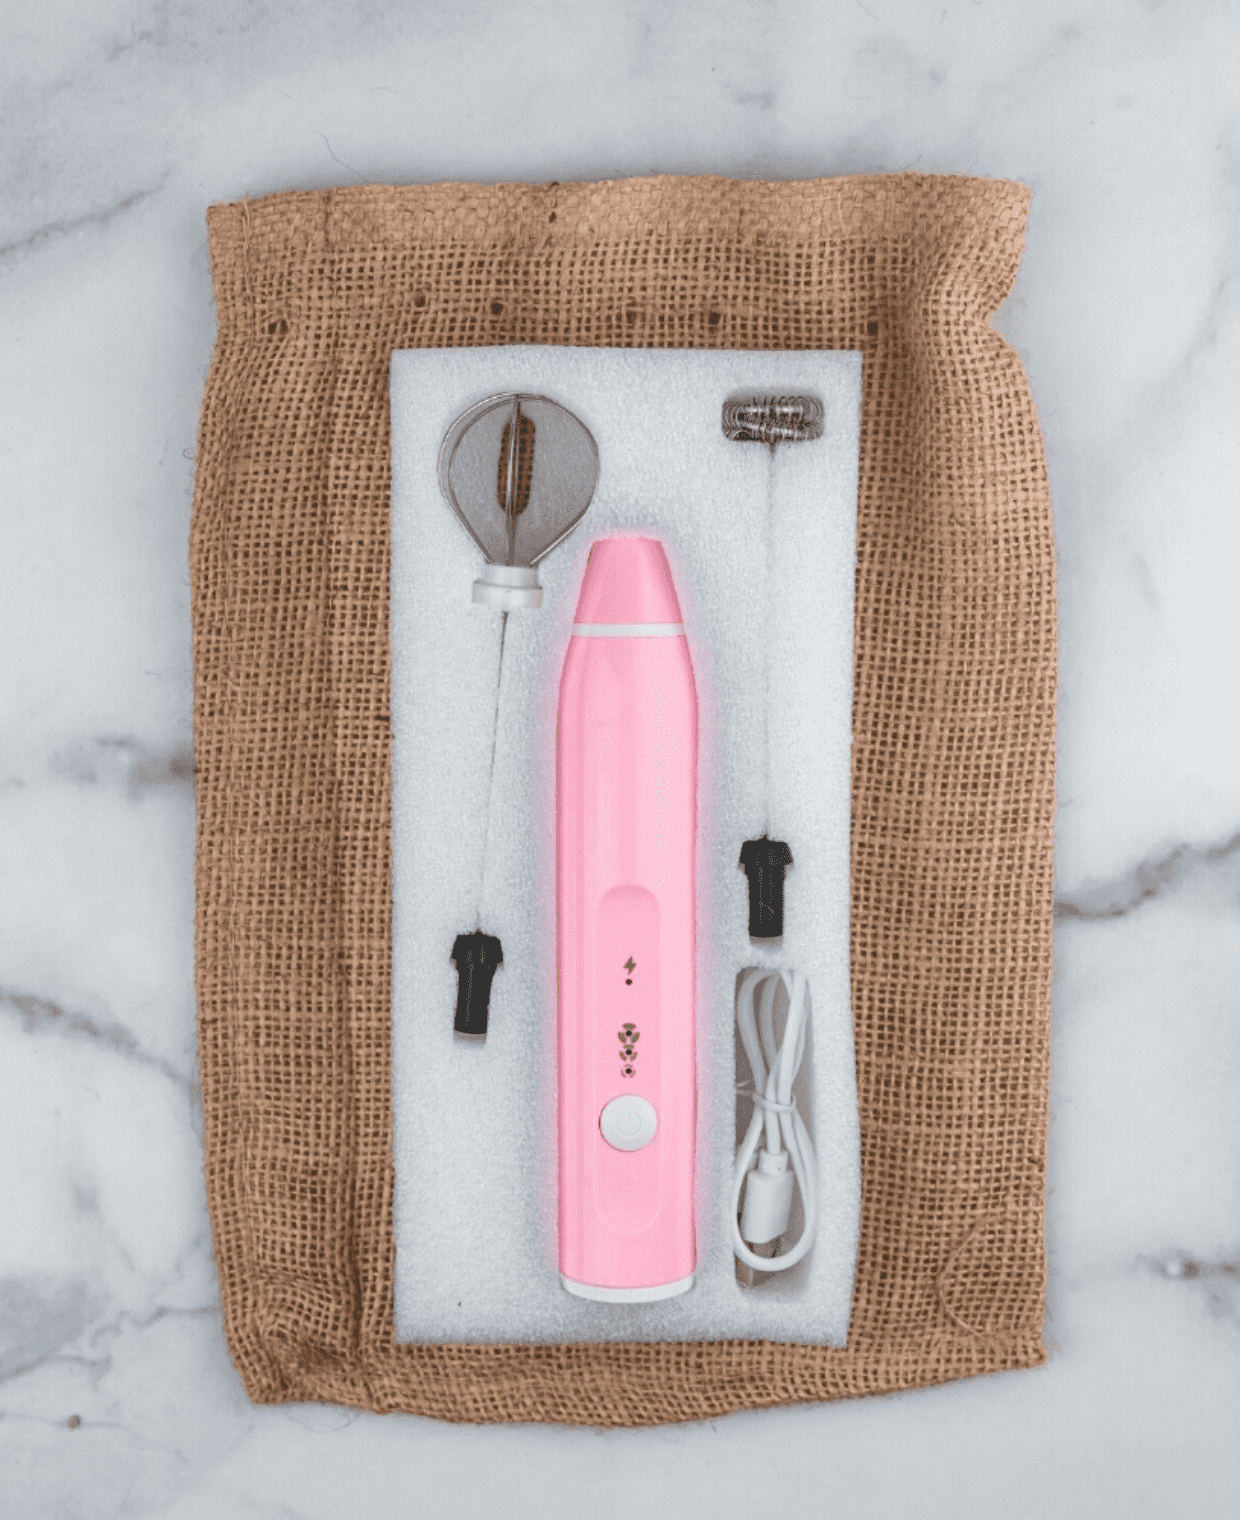 Blume Milk Frother- Pink